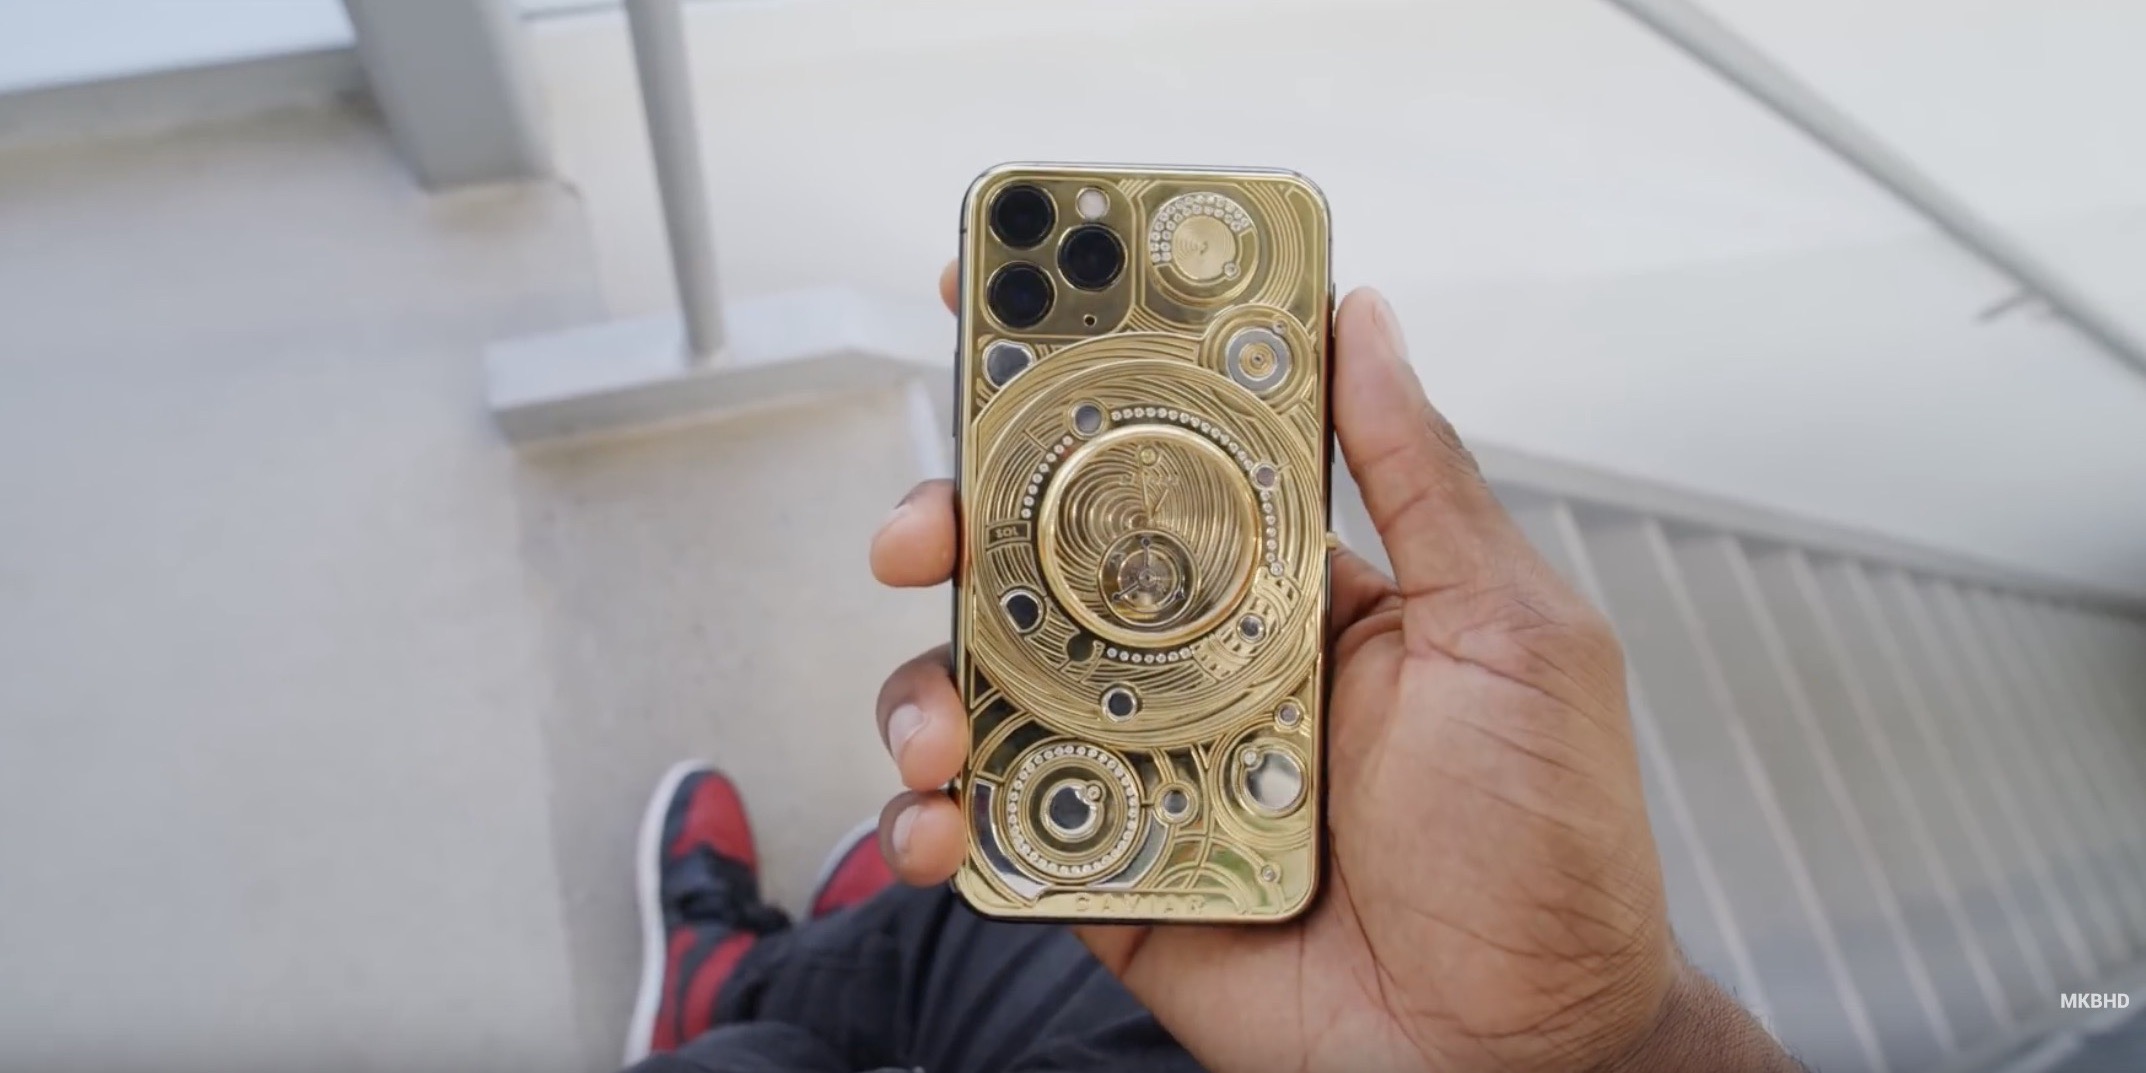 Mkbhd Shares Hands On Impressions With 100k Gold And Diamond Iphone 11 9to5mac